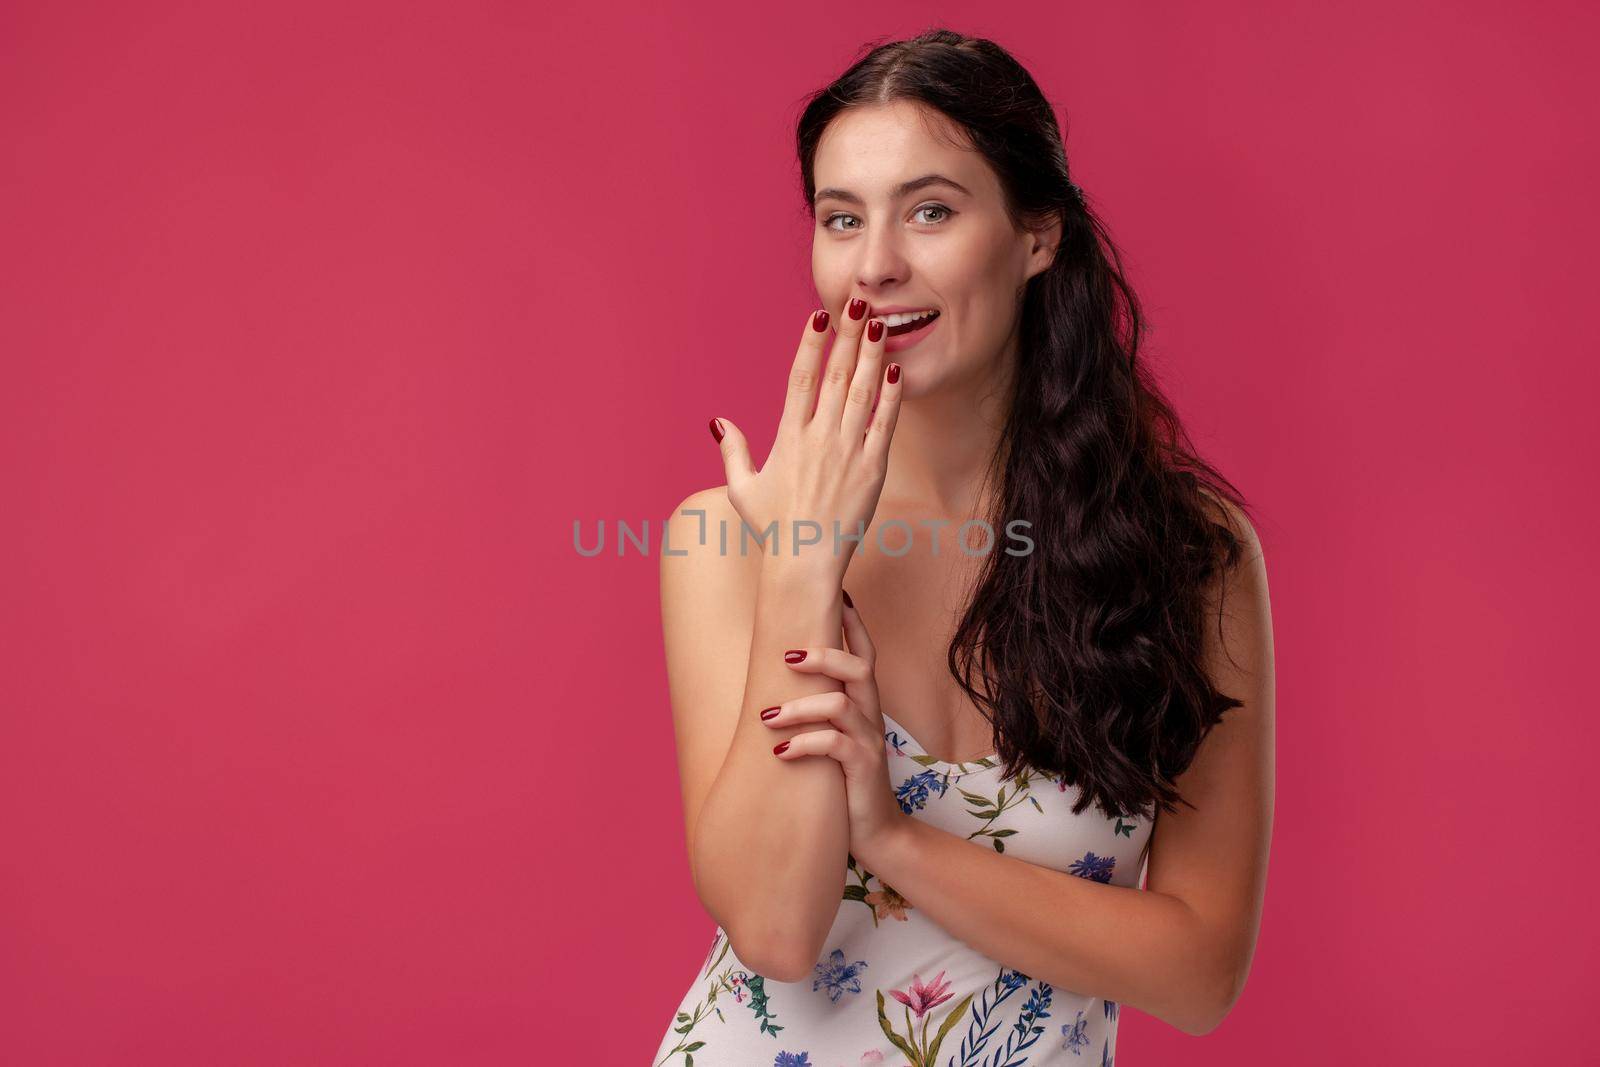 Portrait of a beautiful curly woman, wearing in a white dress with floral print and standing on a pink wall background in studio. She laughs covering her mouth and looking at the camera. People sincere emotions, lifestyle concept. Mockup copy space.